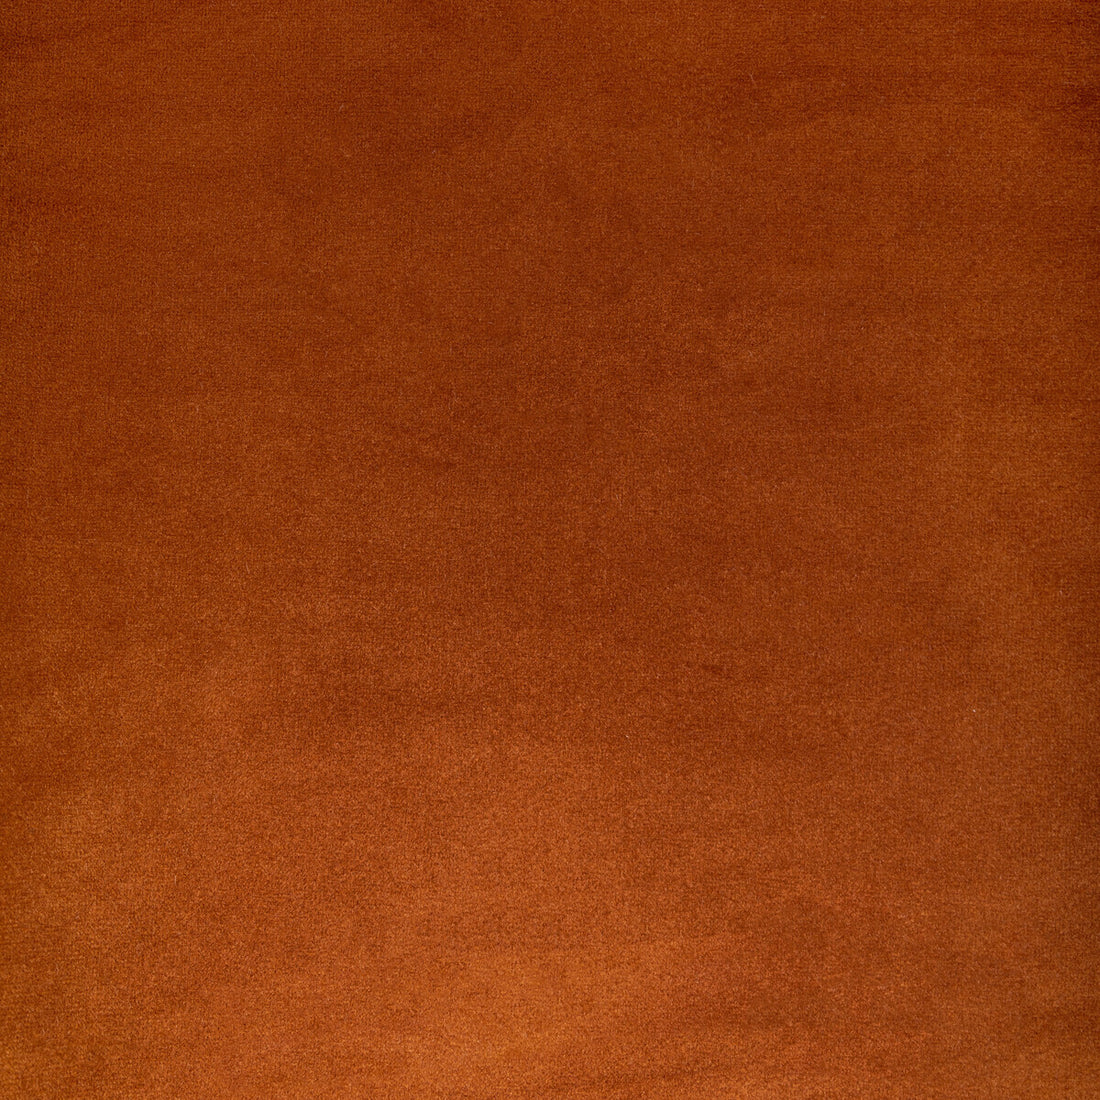 Rocco Velvet fabric in spice color - pattern KW-10065.3685MG45.0 - by Kravet Contract